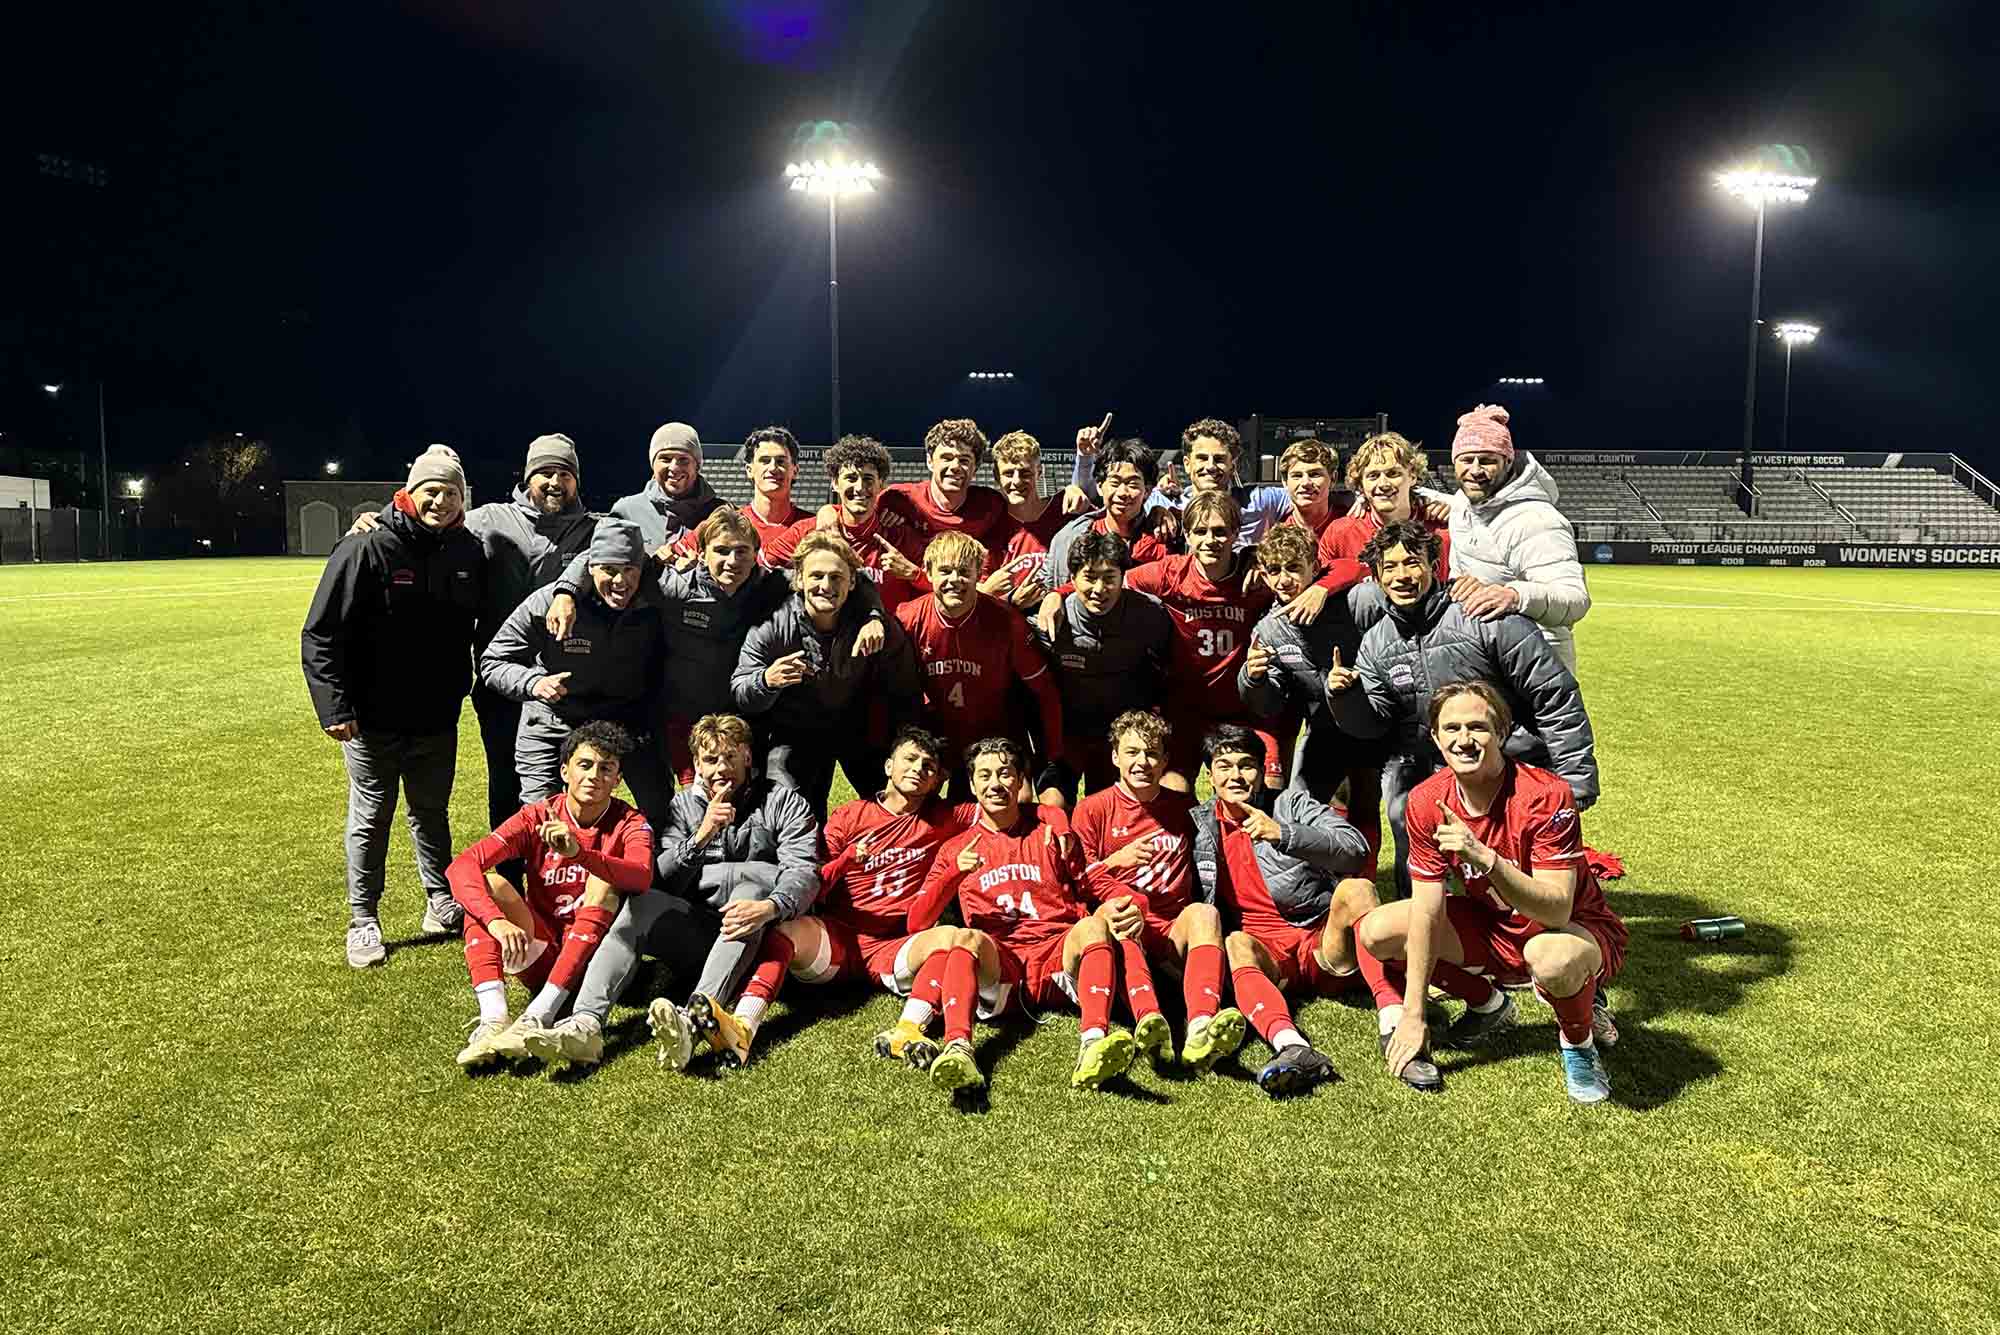 Photo: A group photo of the BU men's soccer team in their red uniforms. They are on a soccer field, smiling with their coaches.